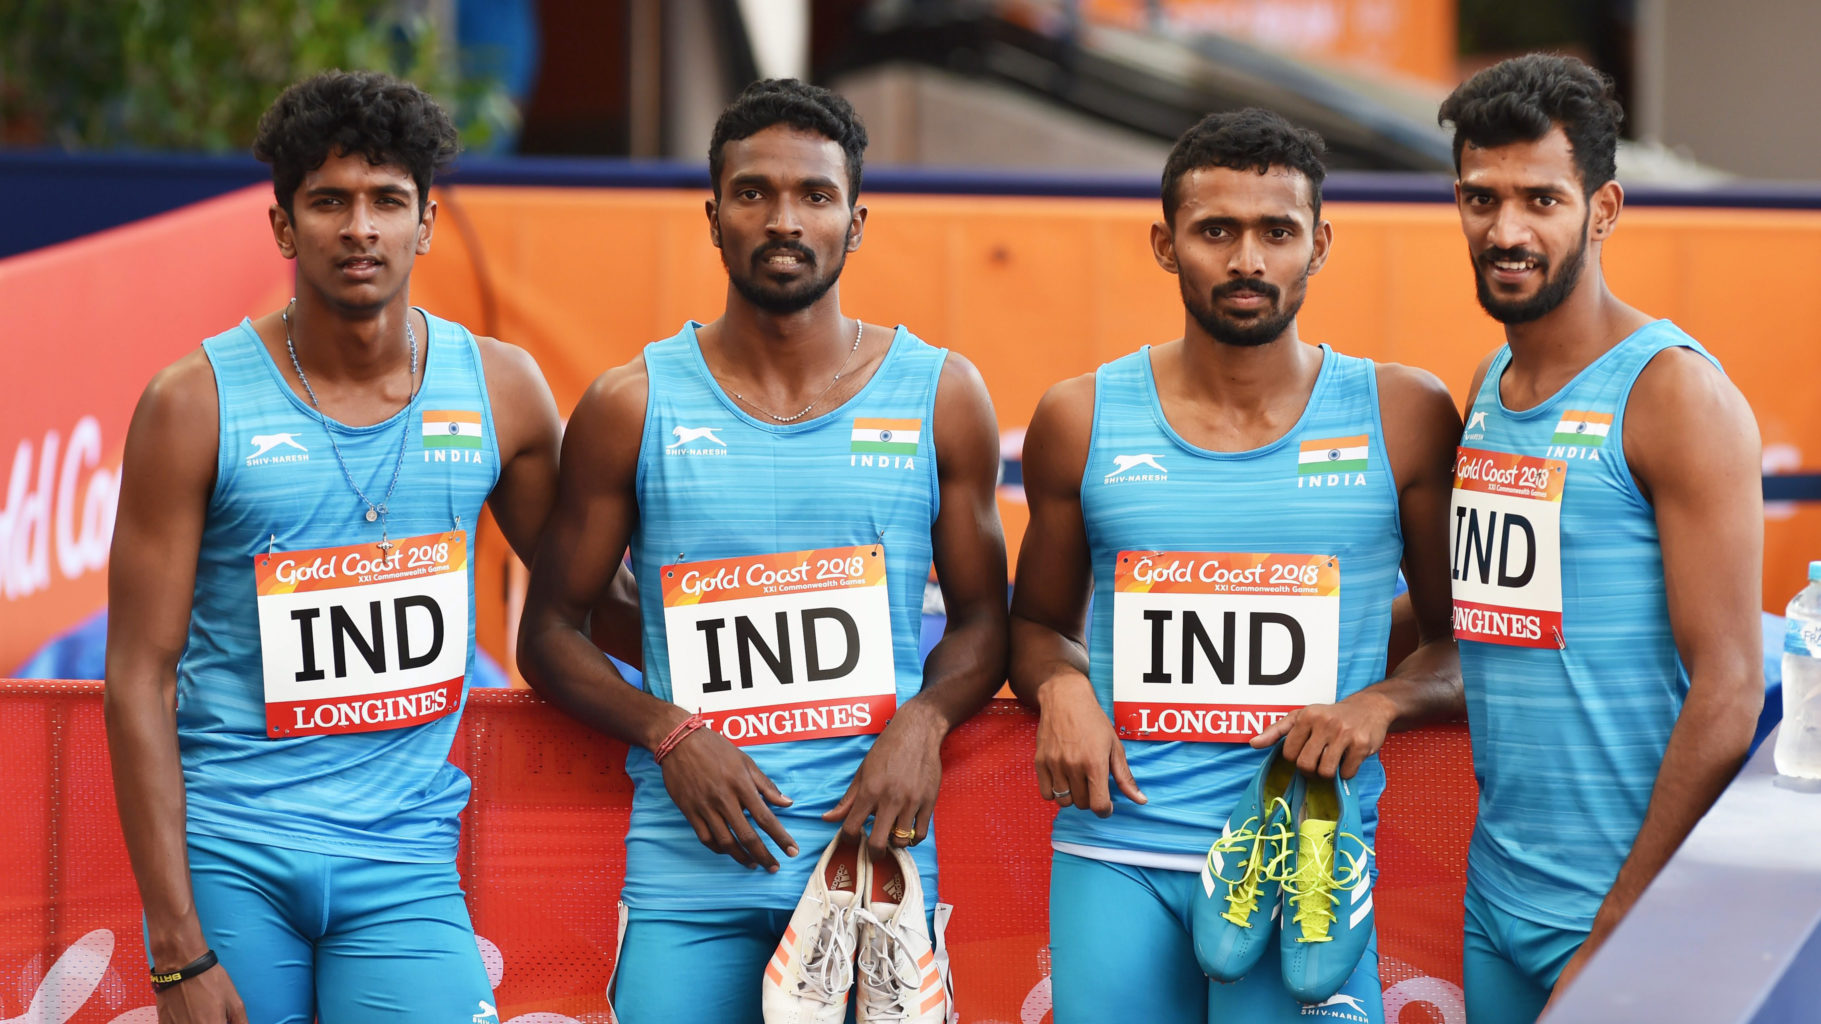 Indian Relay team